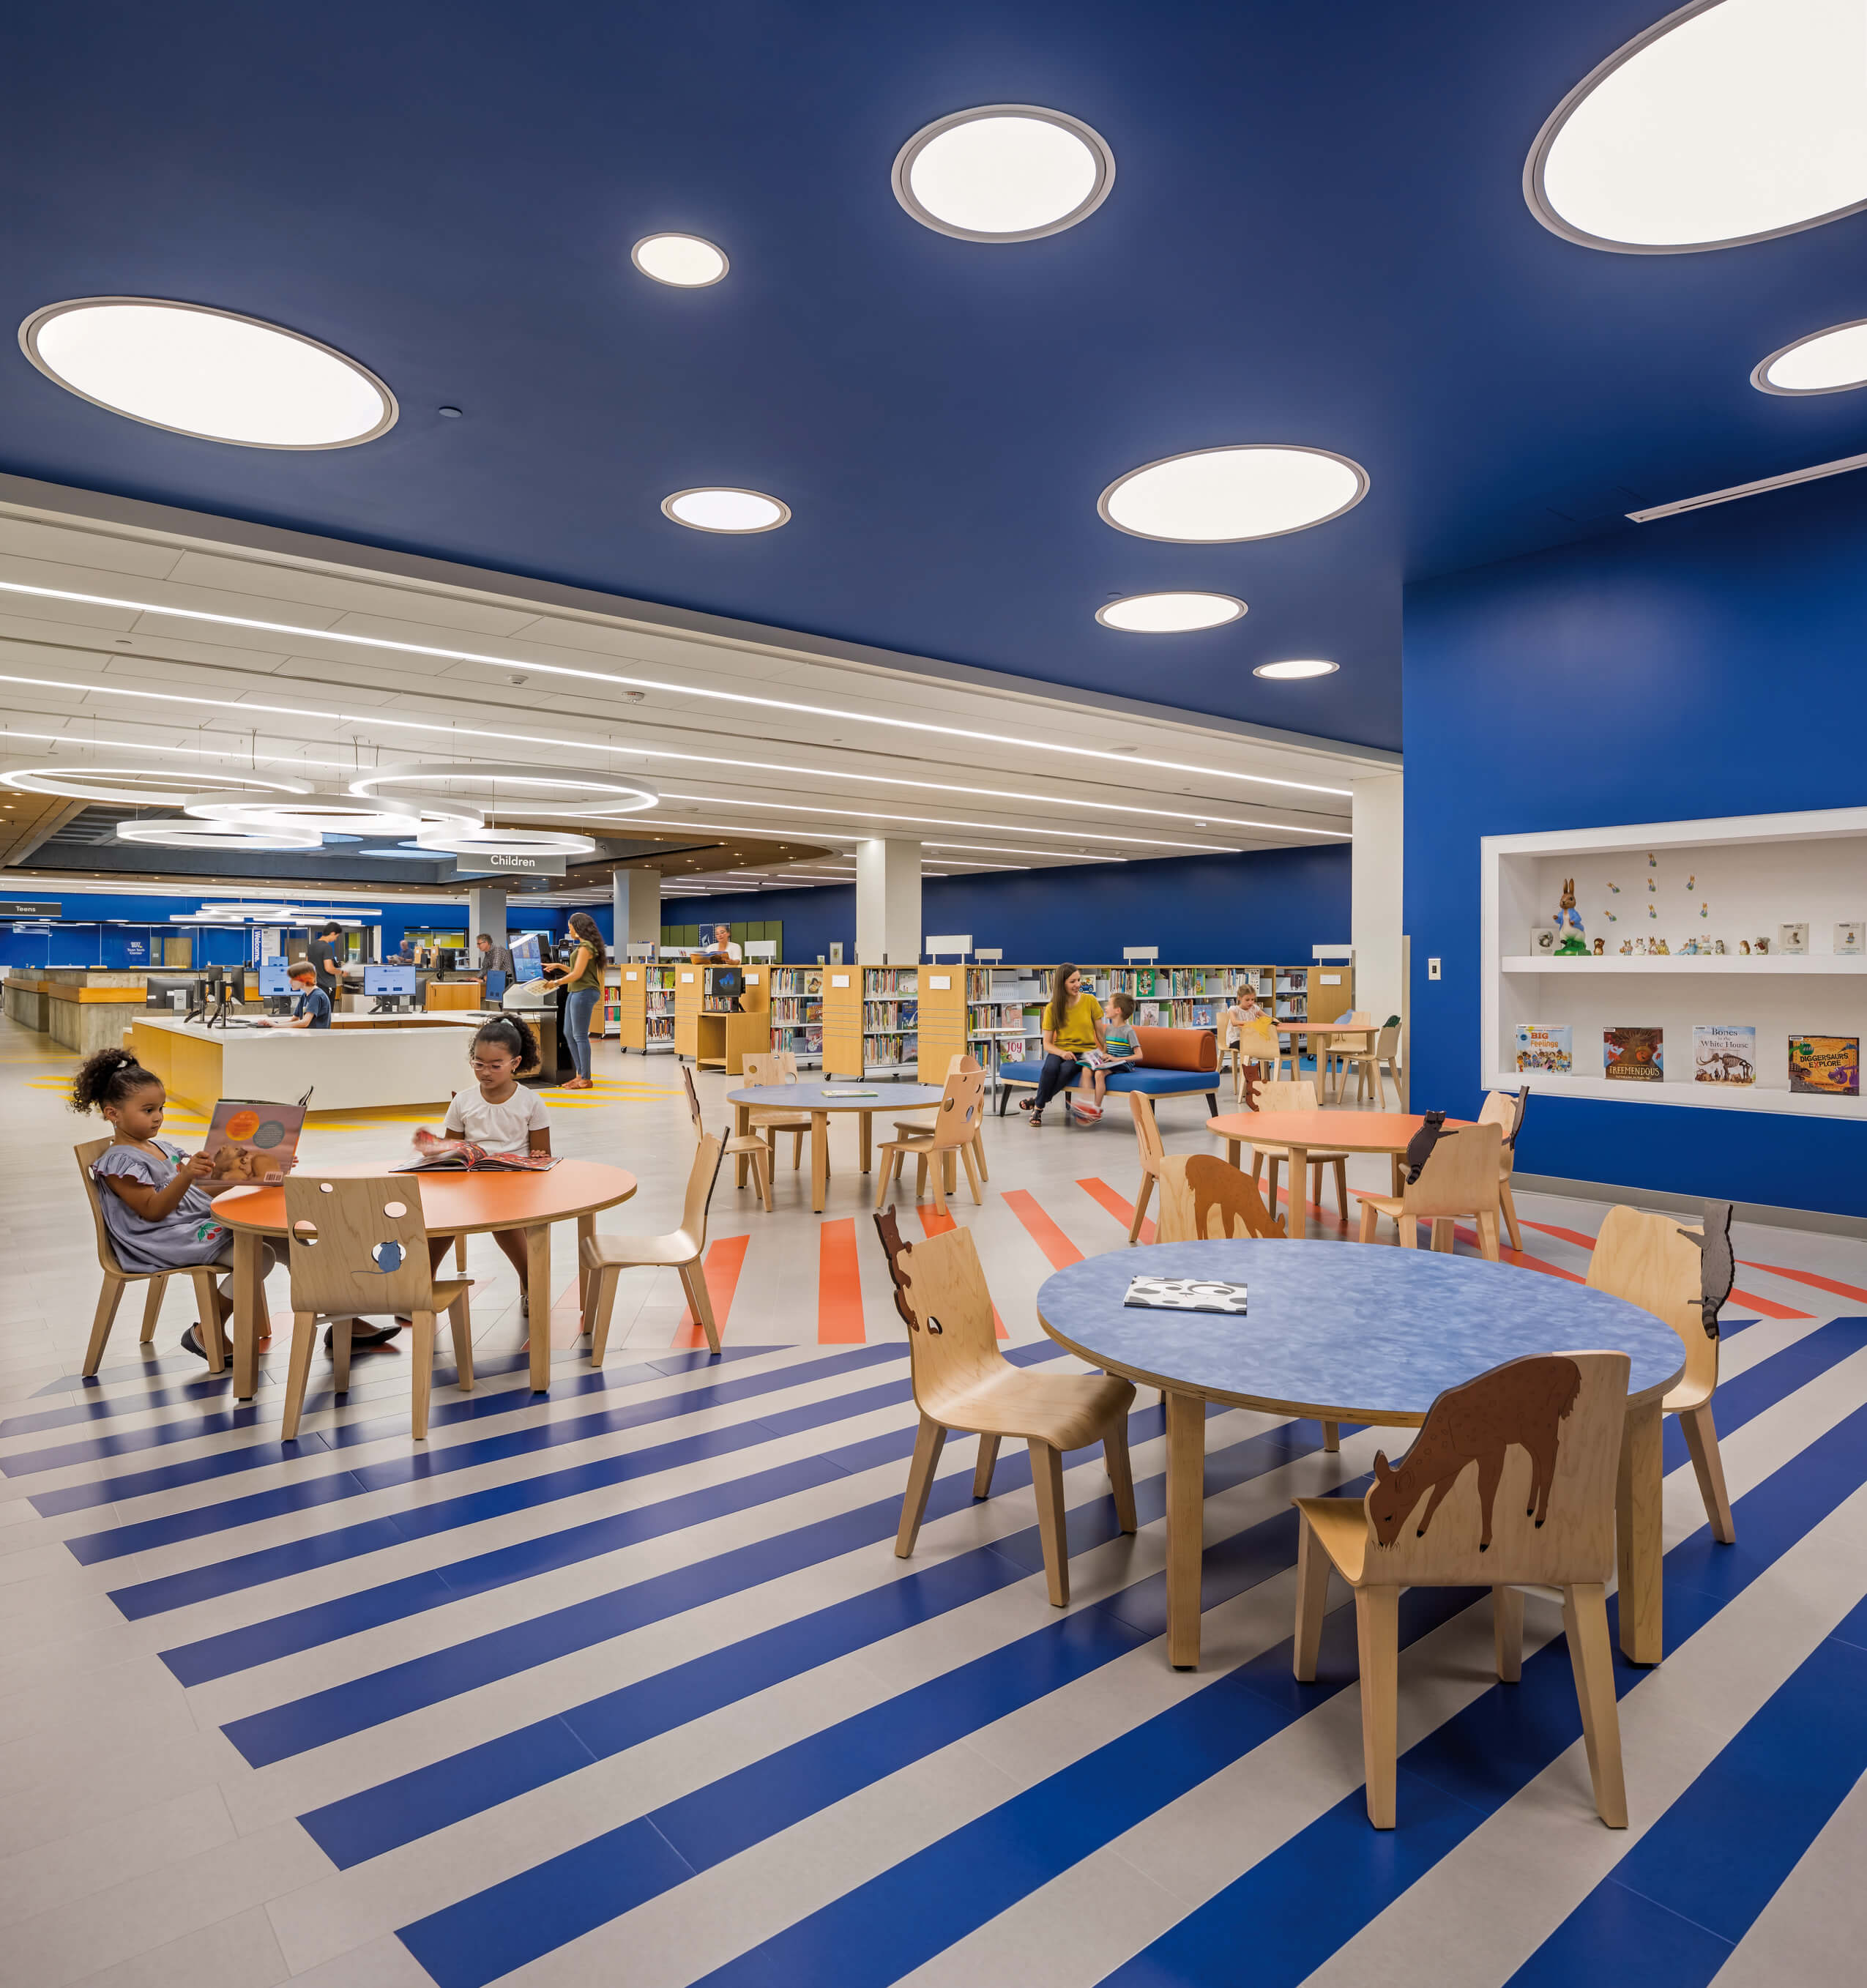 a children's section in a library with bright blue colorway